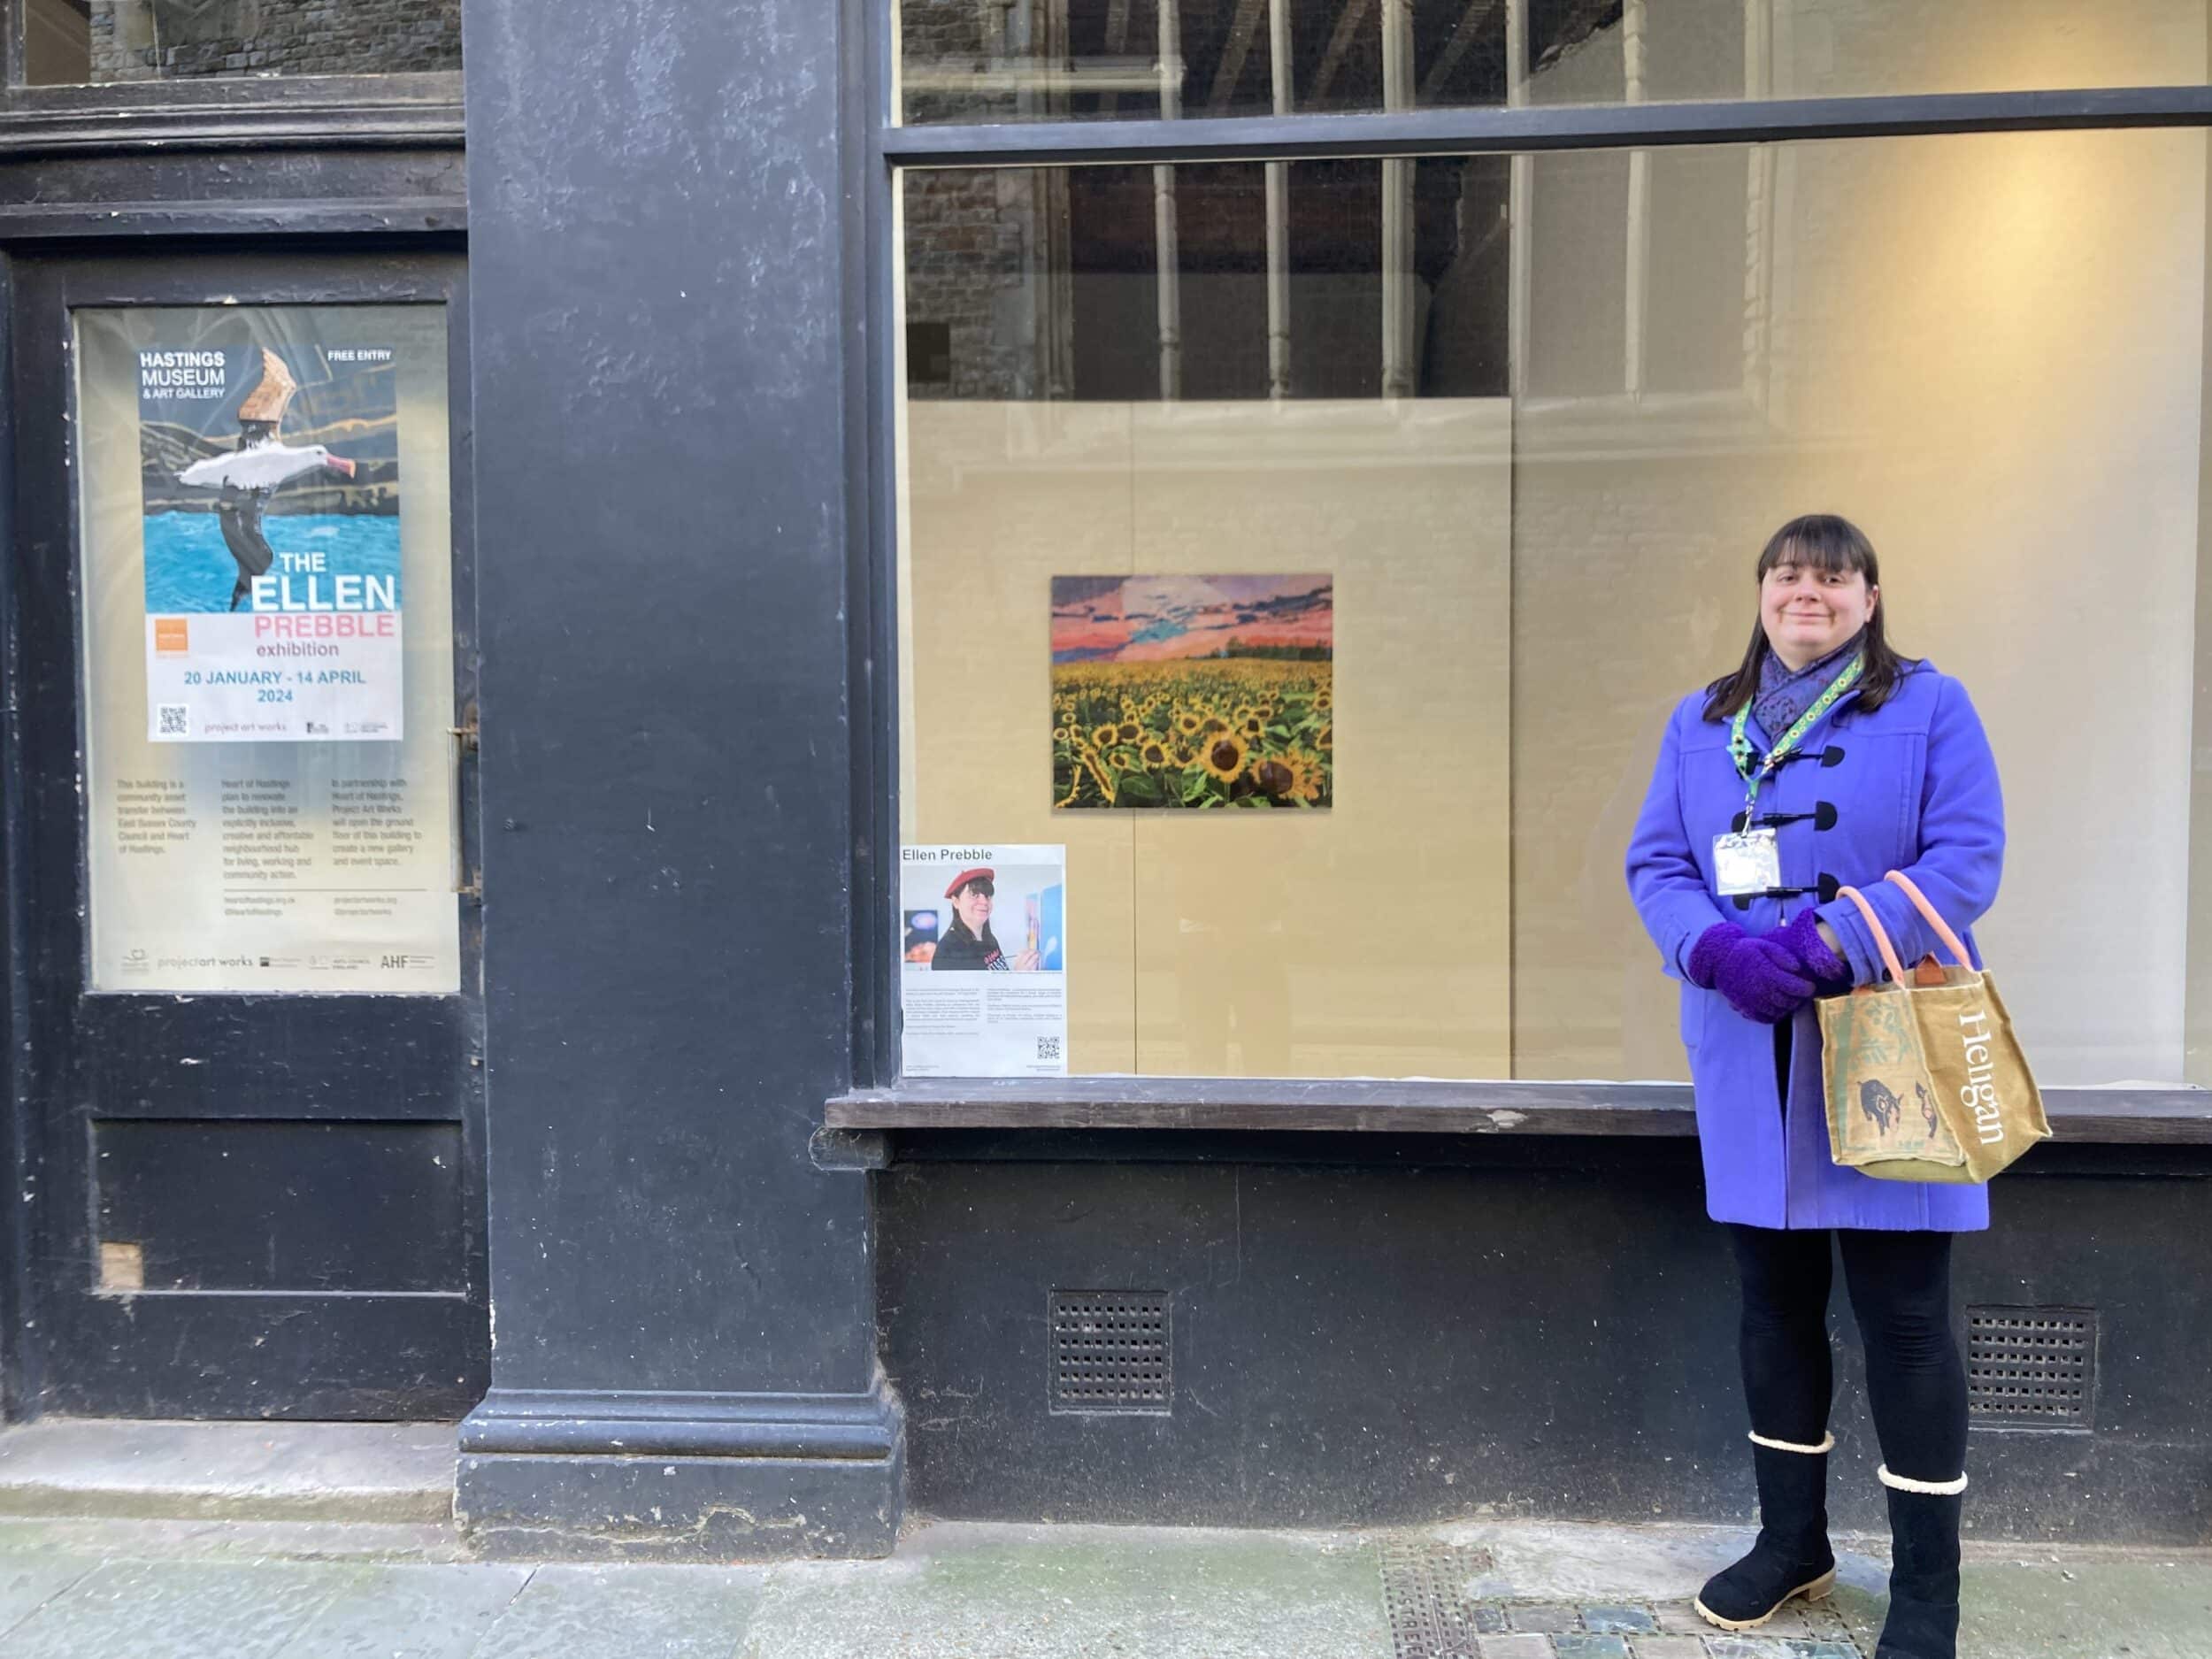 Ellen stands in front of the Untitled Gallery window. In the window you can see her Sunflower Fields painting and a poster for her exhibition.